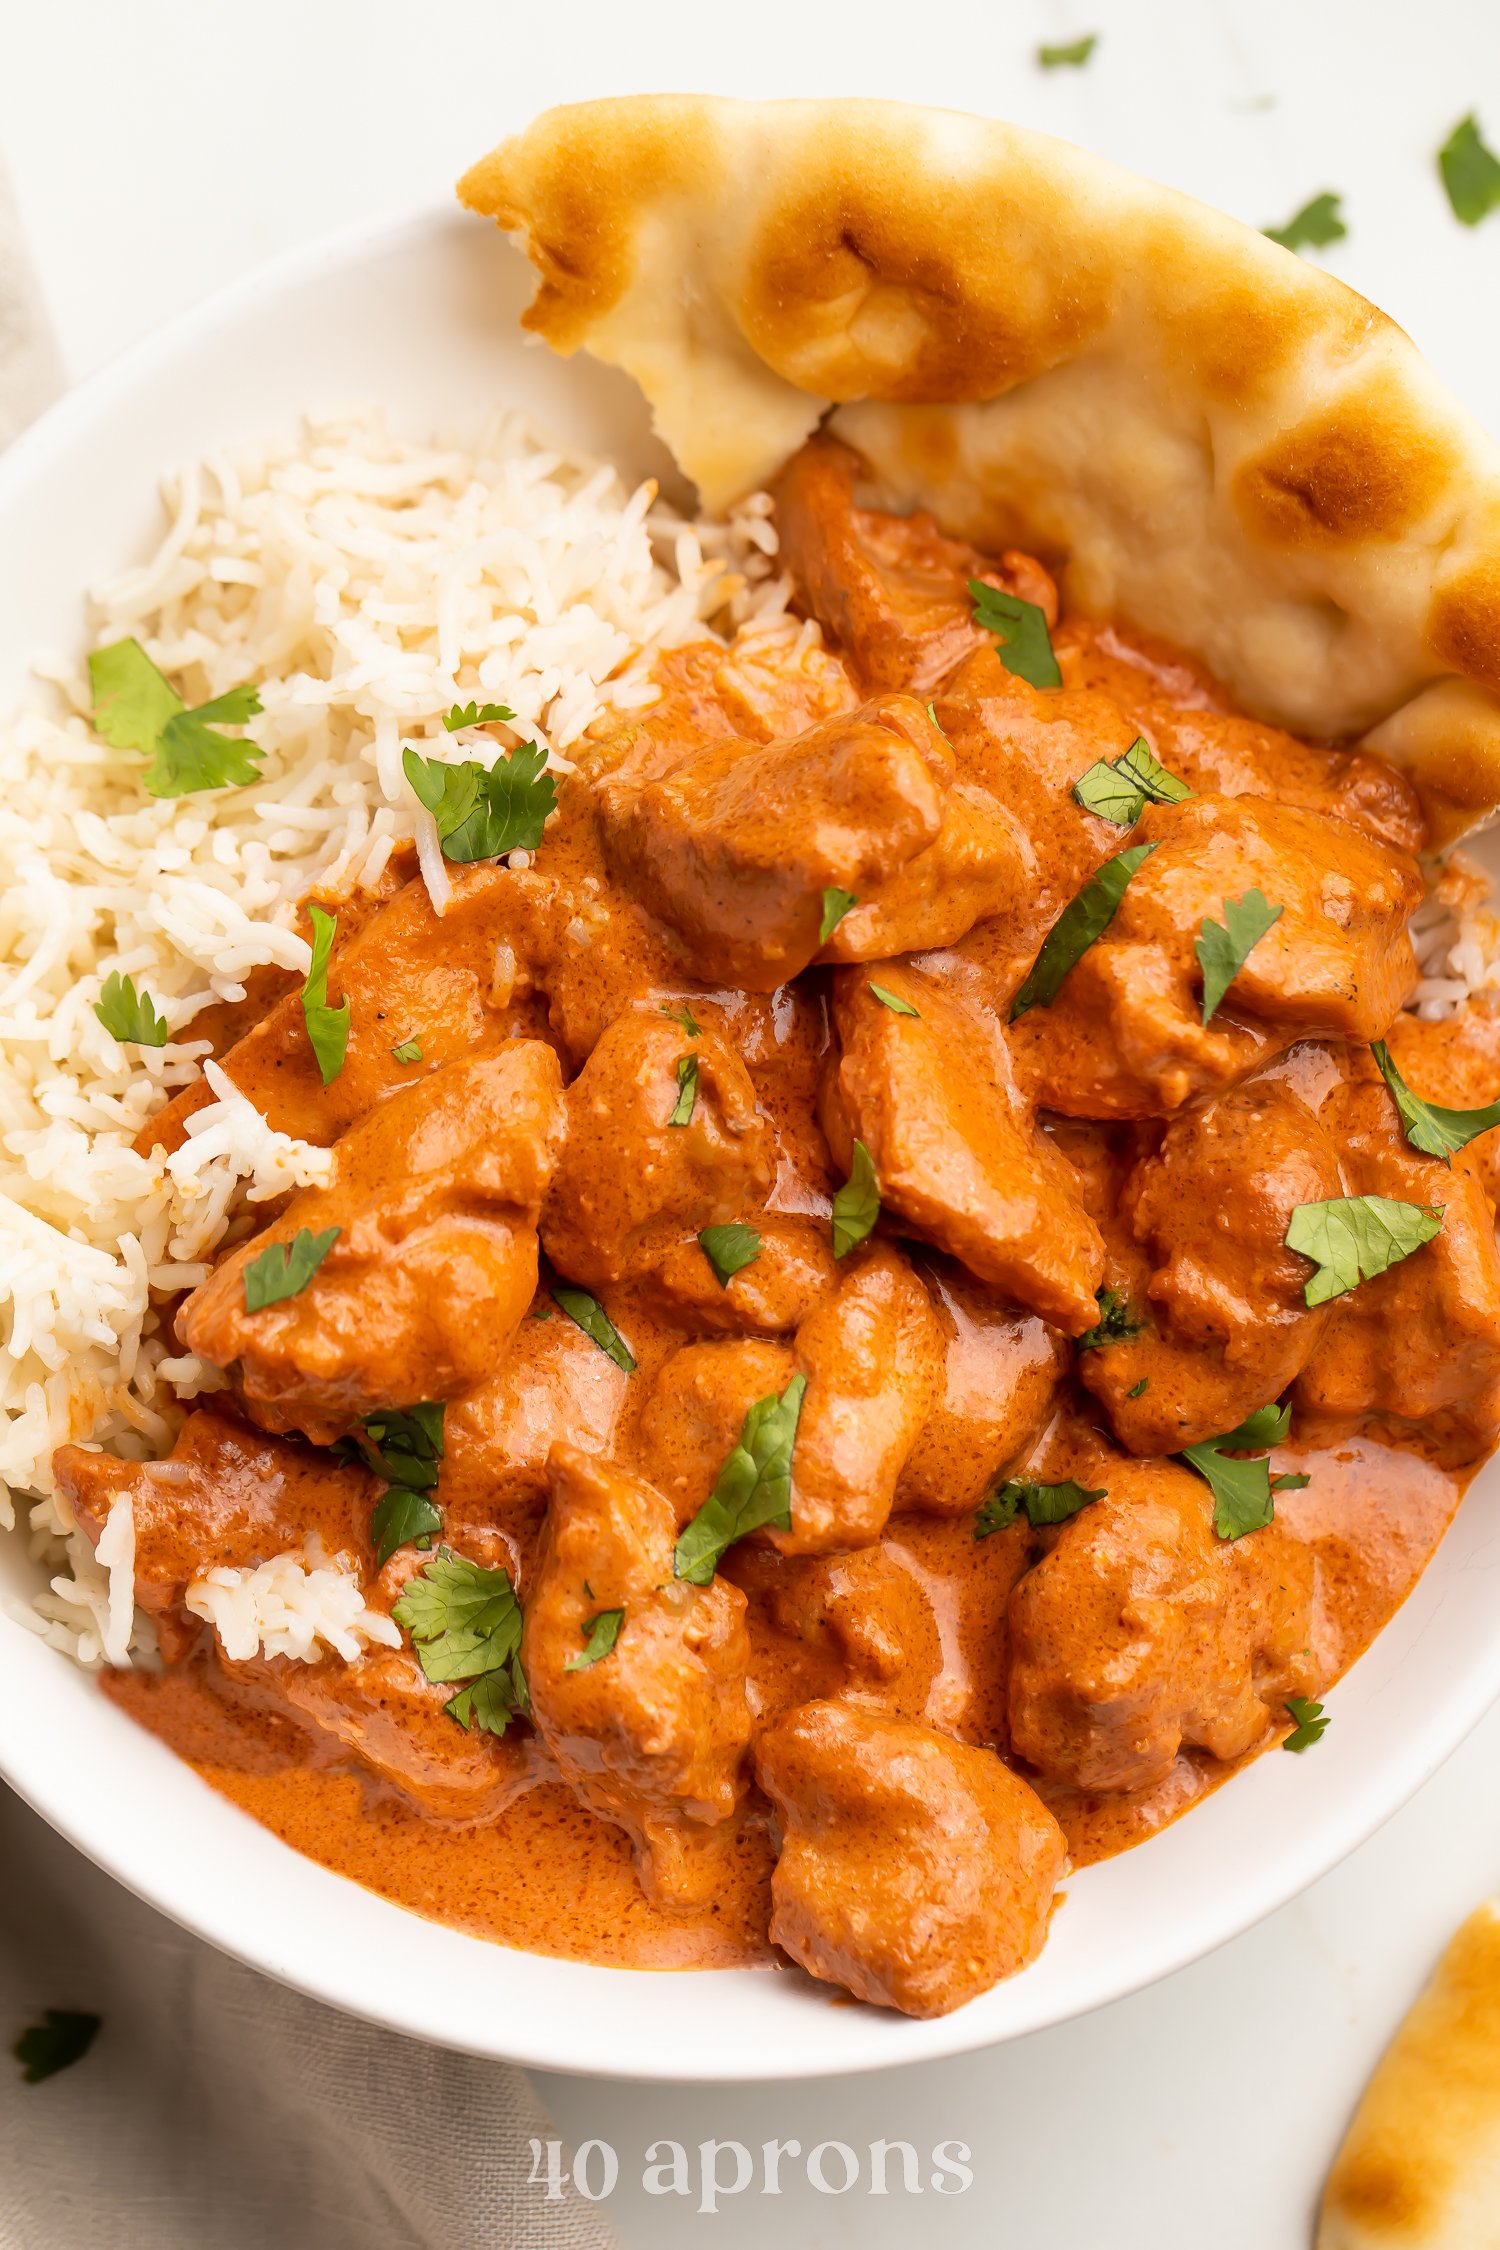 Overhead photo of butter chicken in a creamy red-orange sauce plated next to white rice and naan.